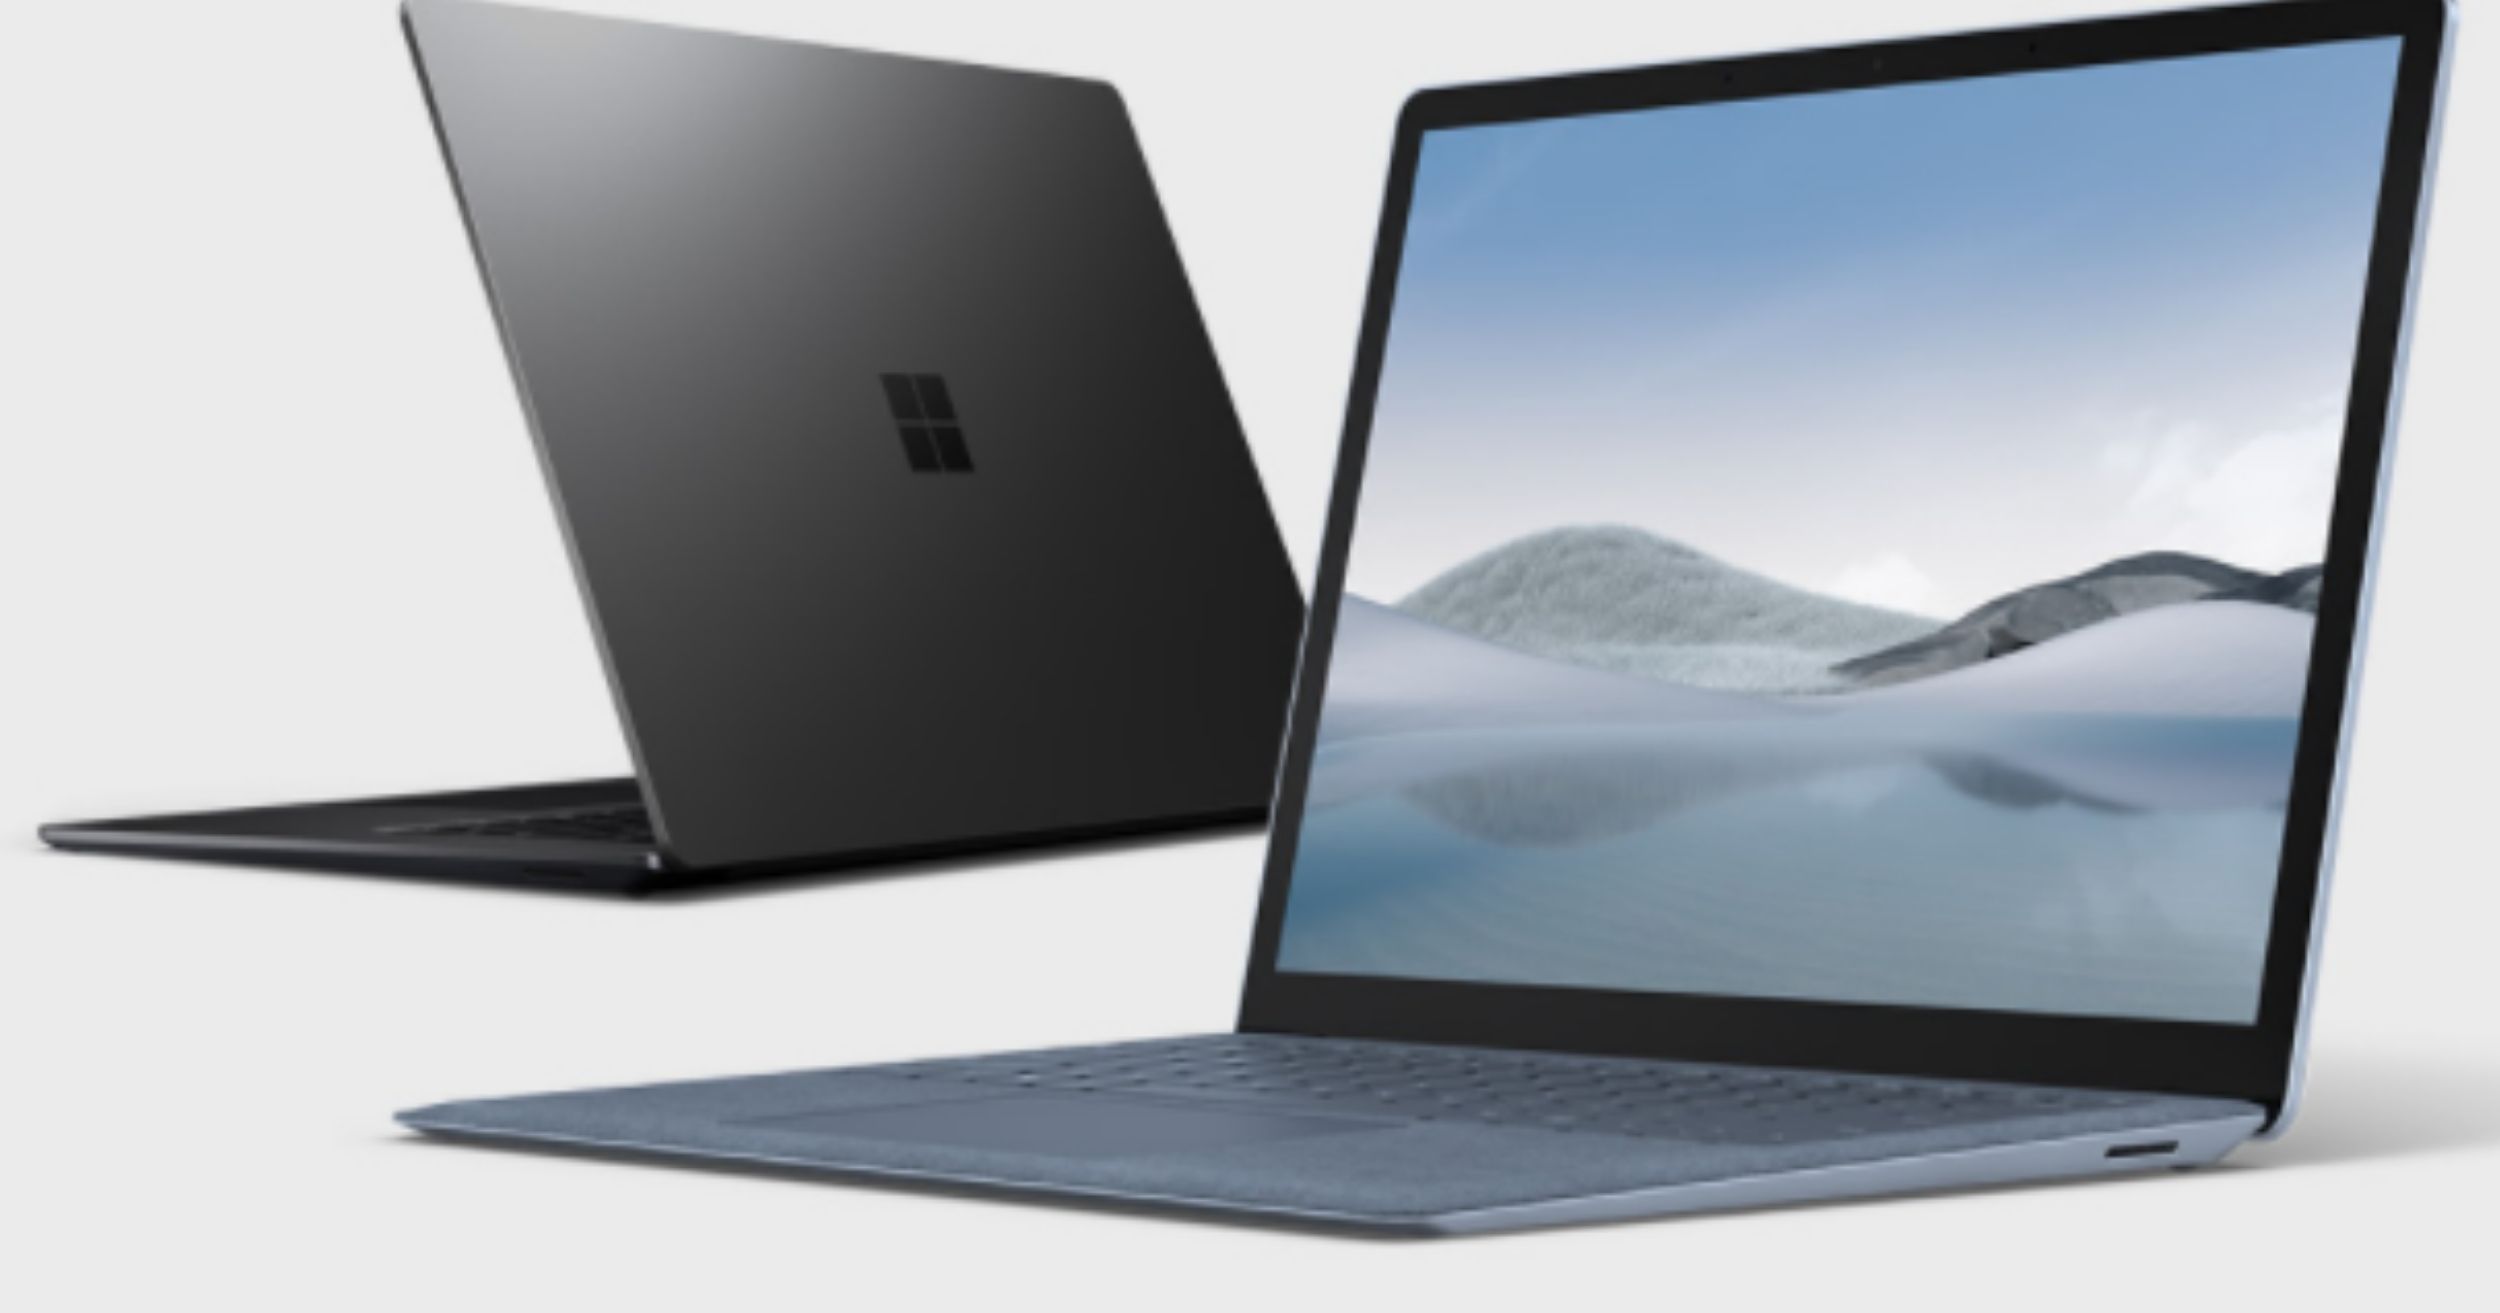 Microsoft Surface Laptop announced with 11th Gen Intel Core and AMD Ryzen  4000 series